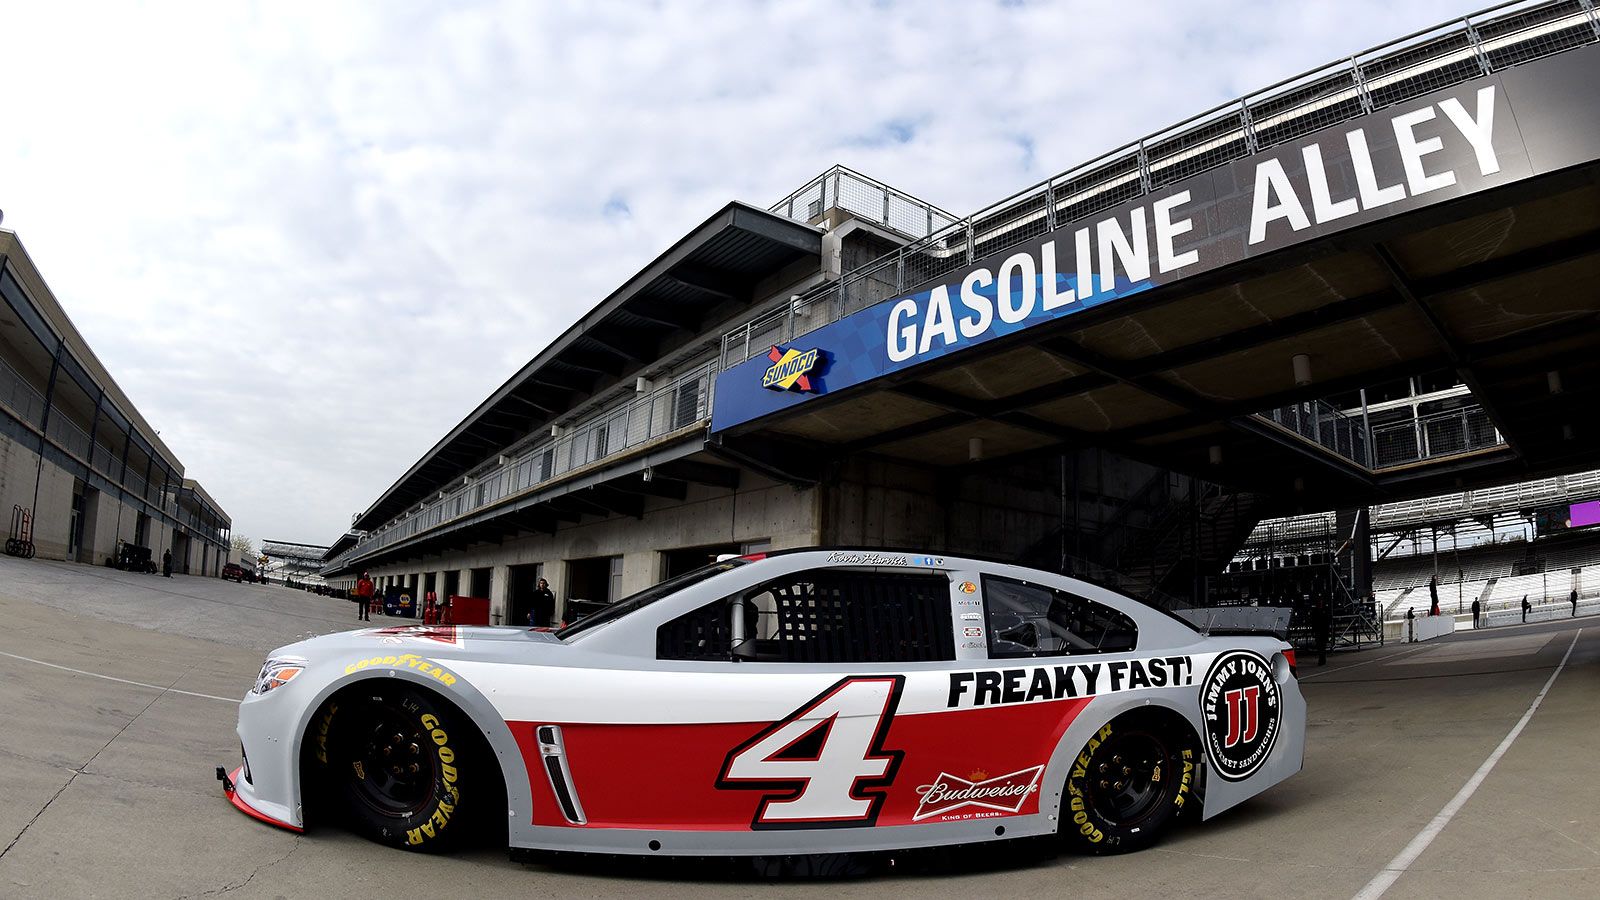 Five contenders who could win second biggest race of Sprint Cup